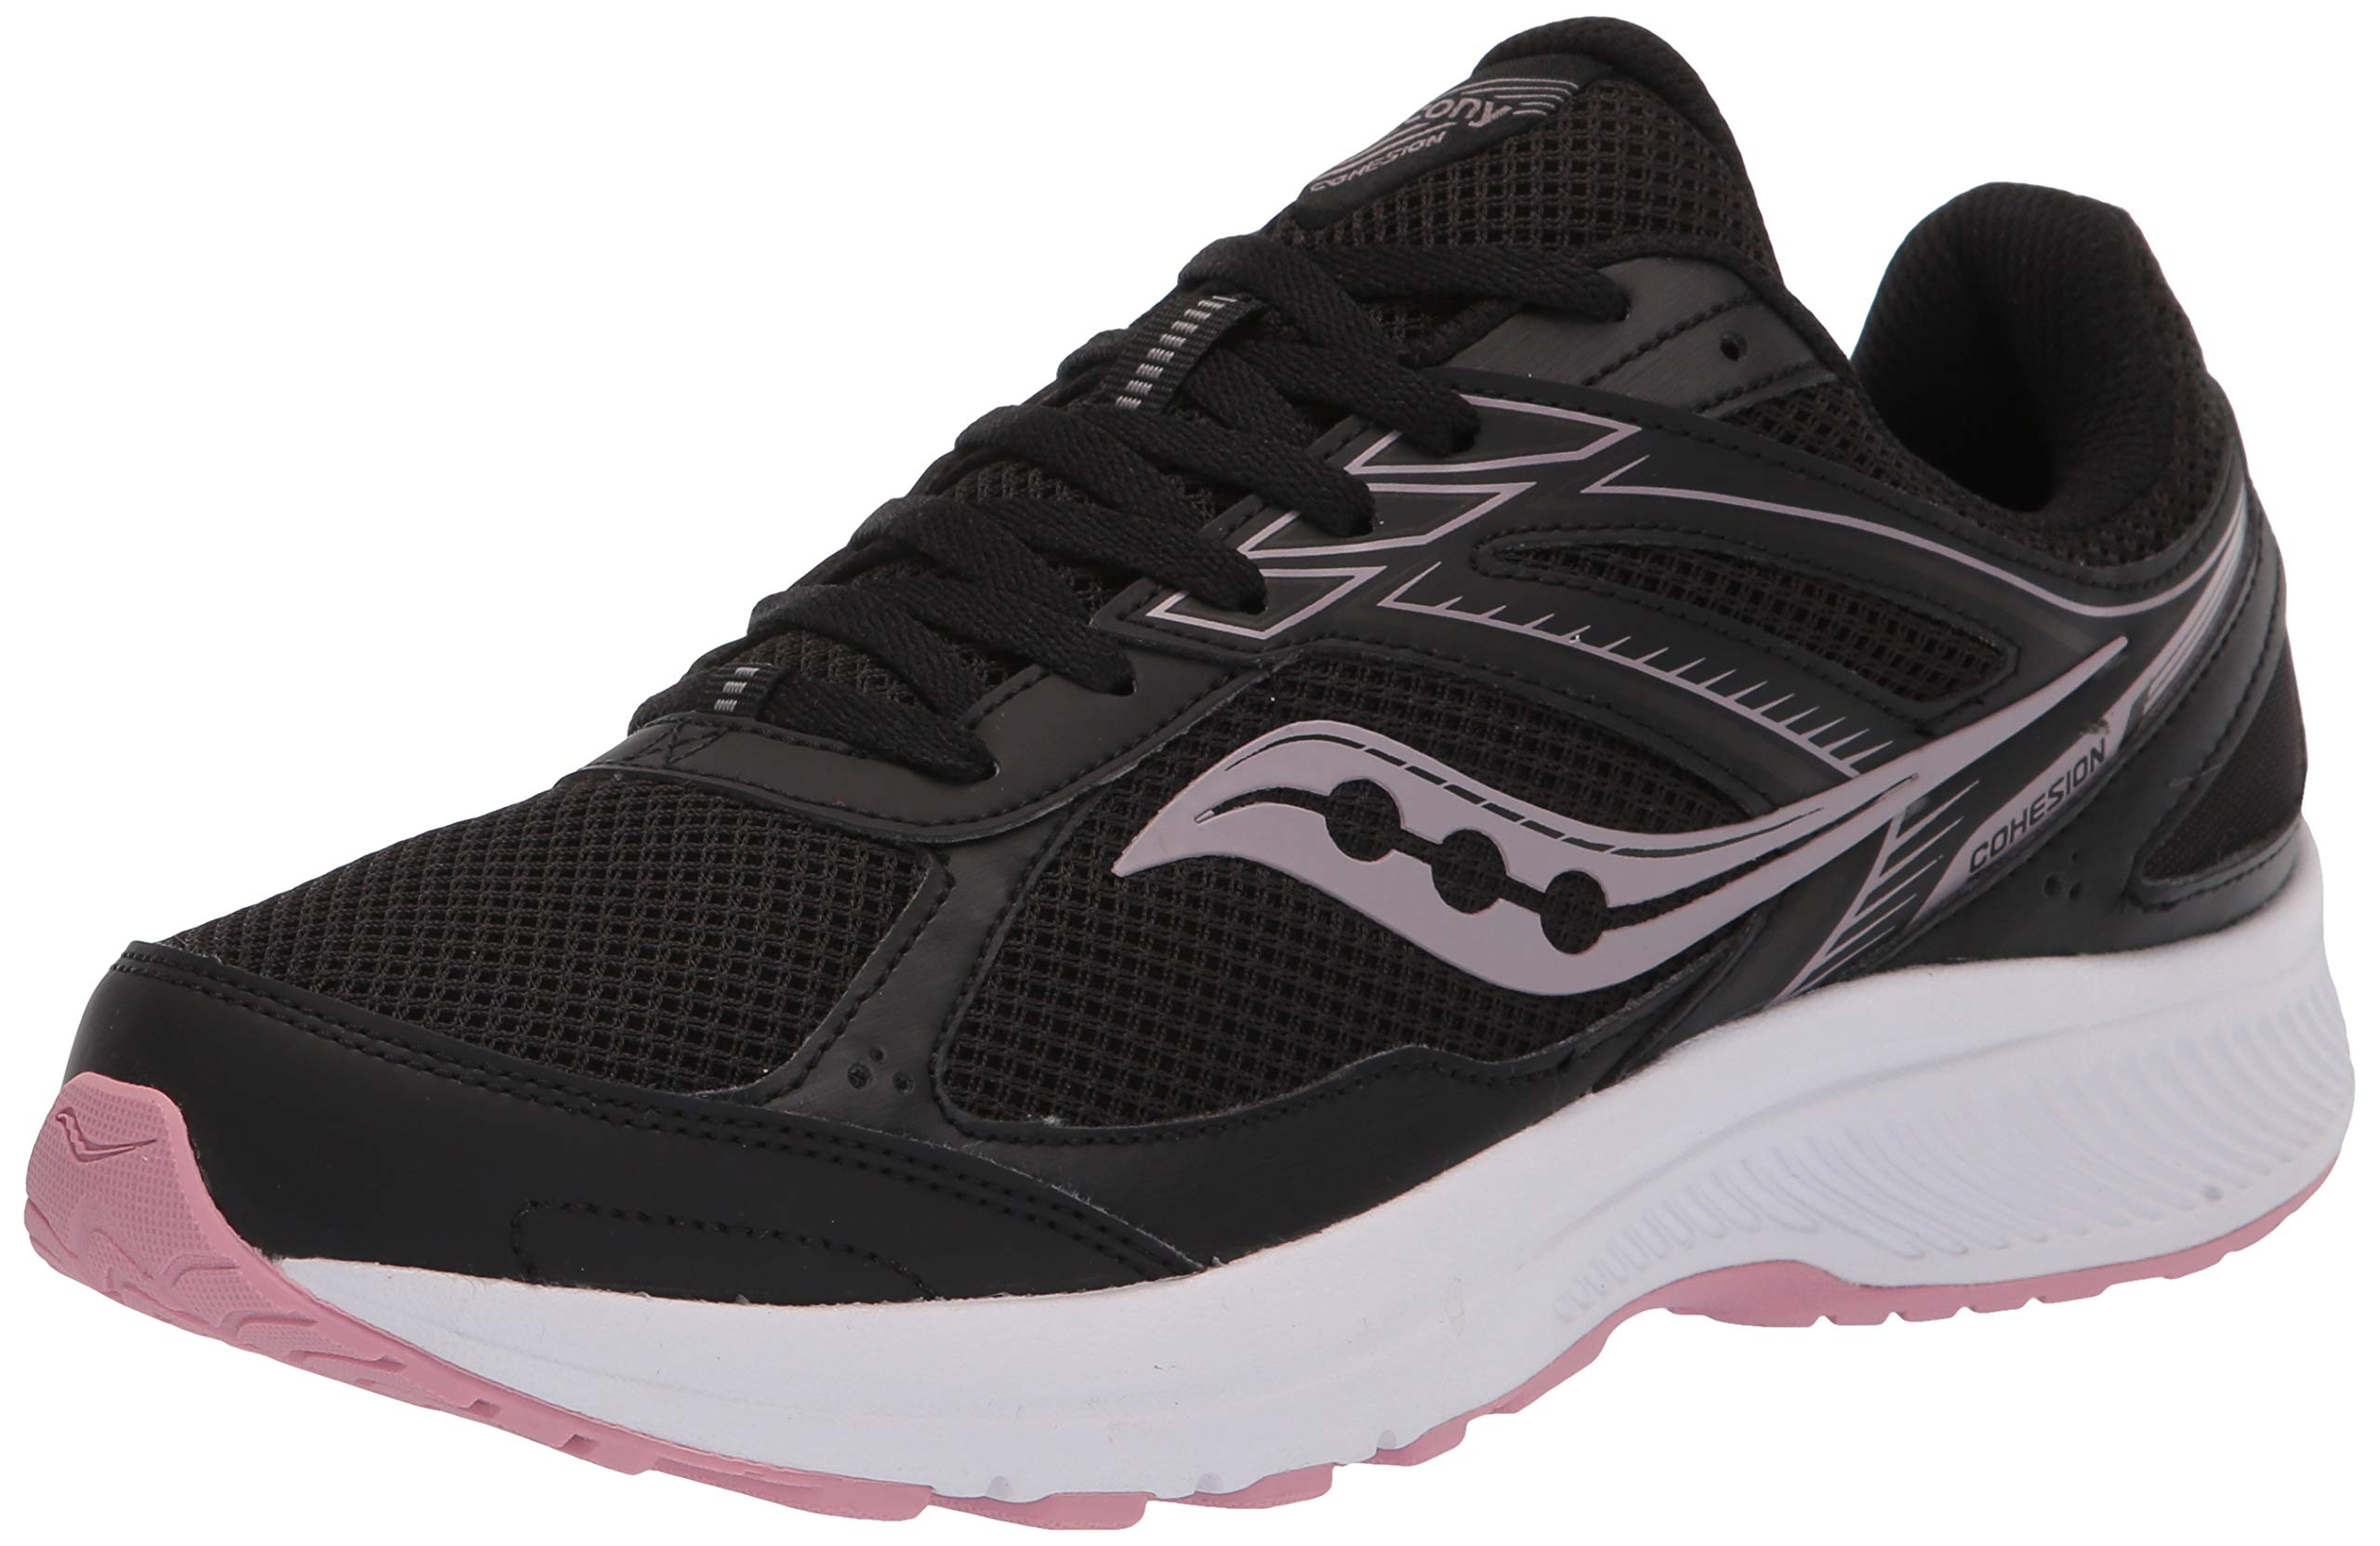 Saucony Women's Cohesion 14 Road Running Shoe